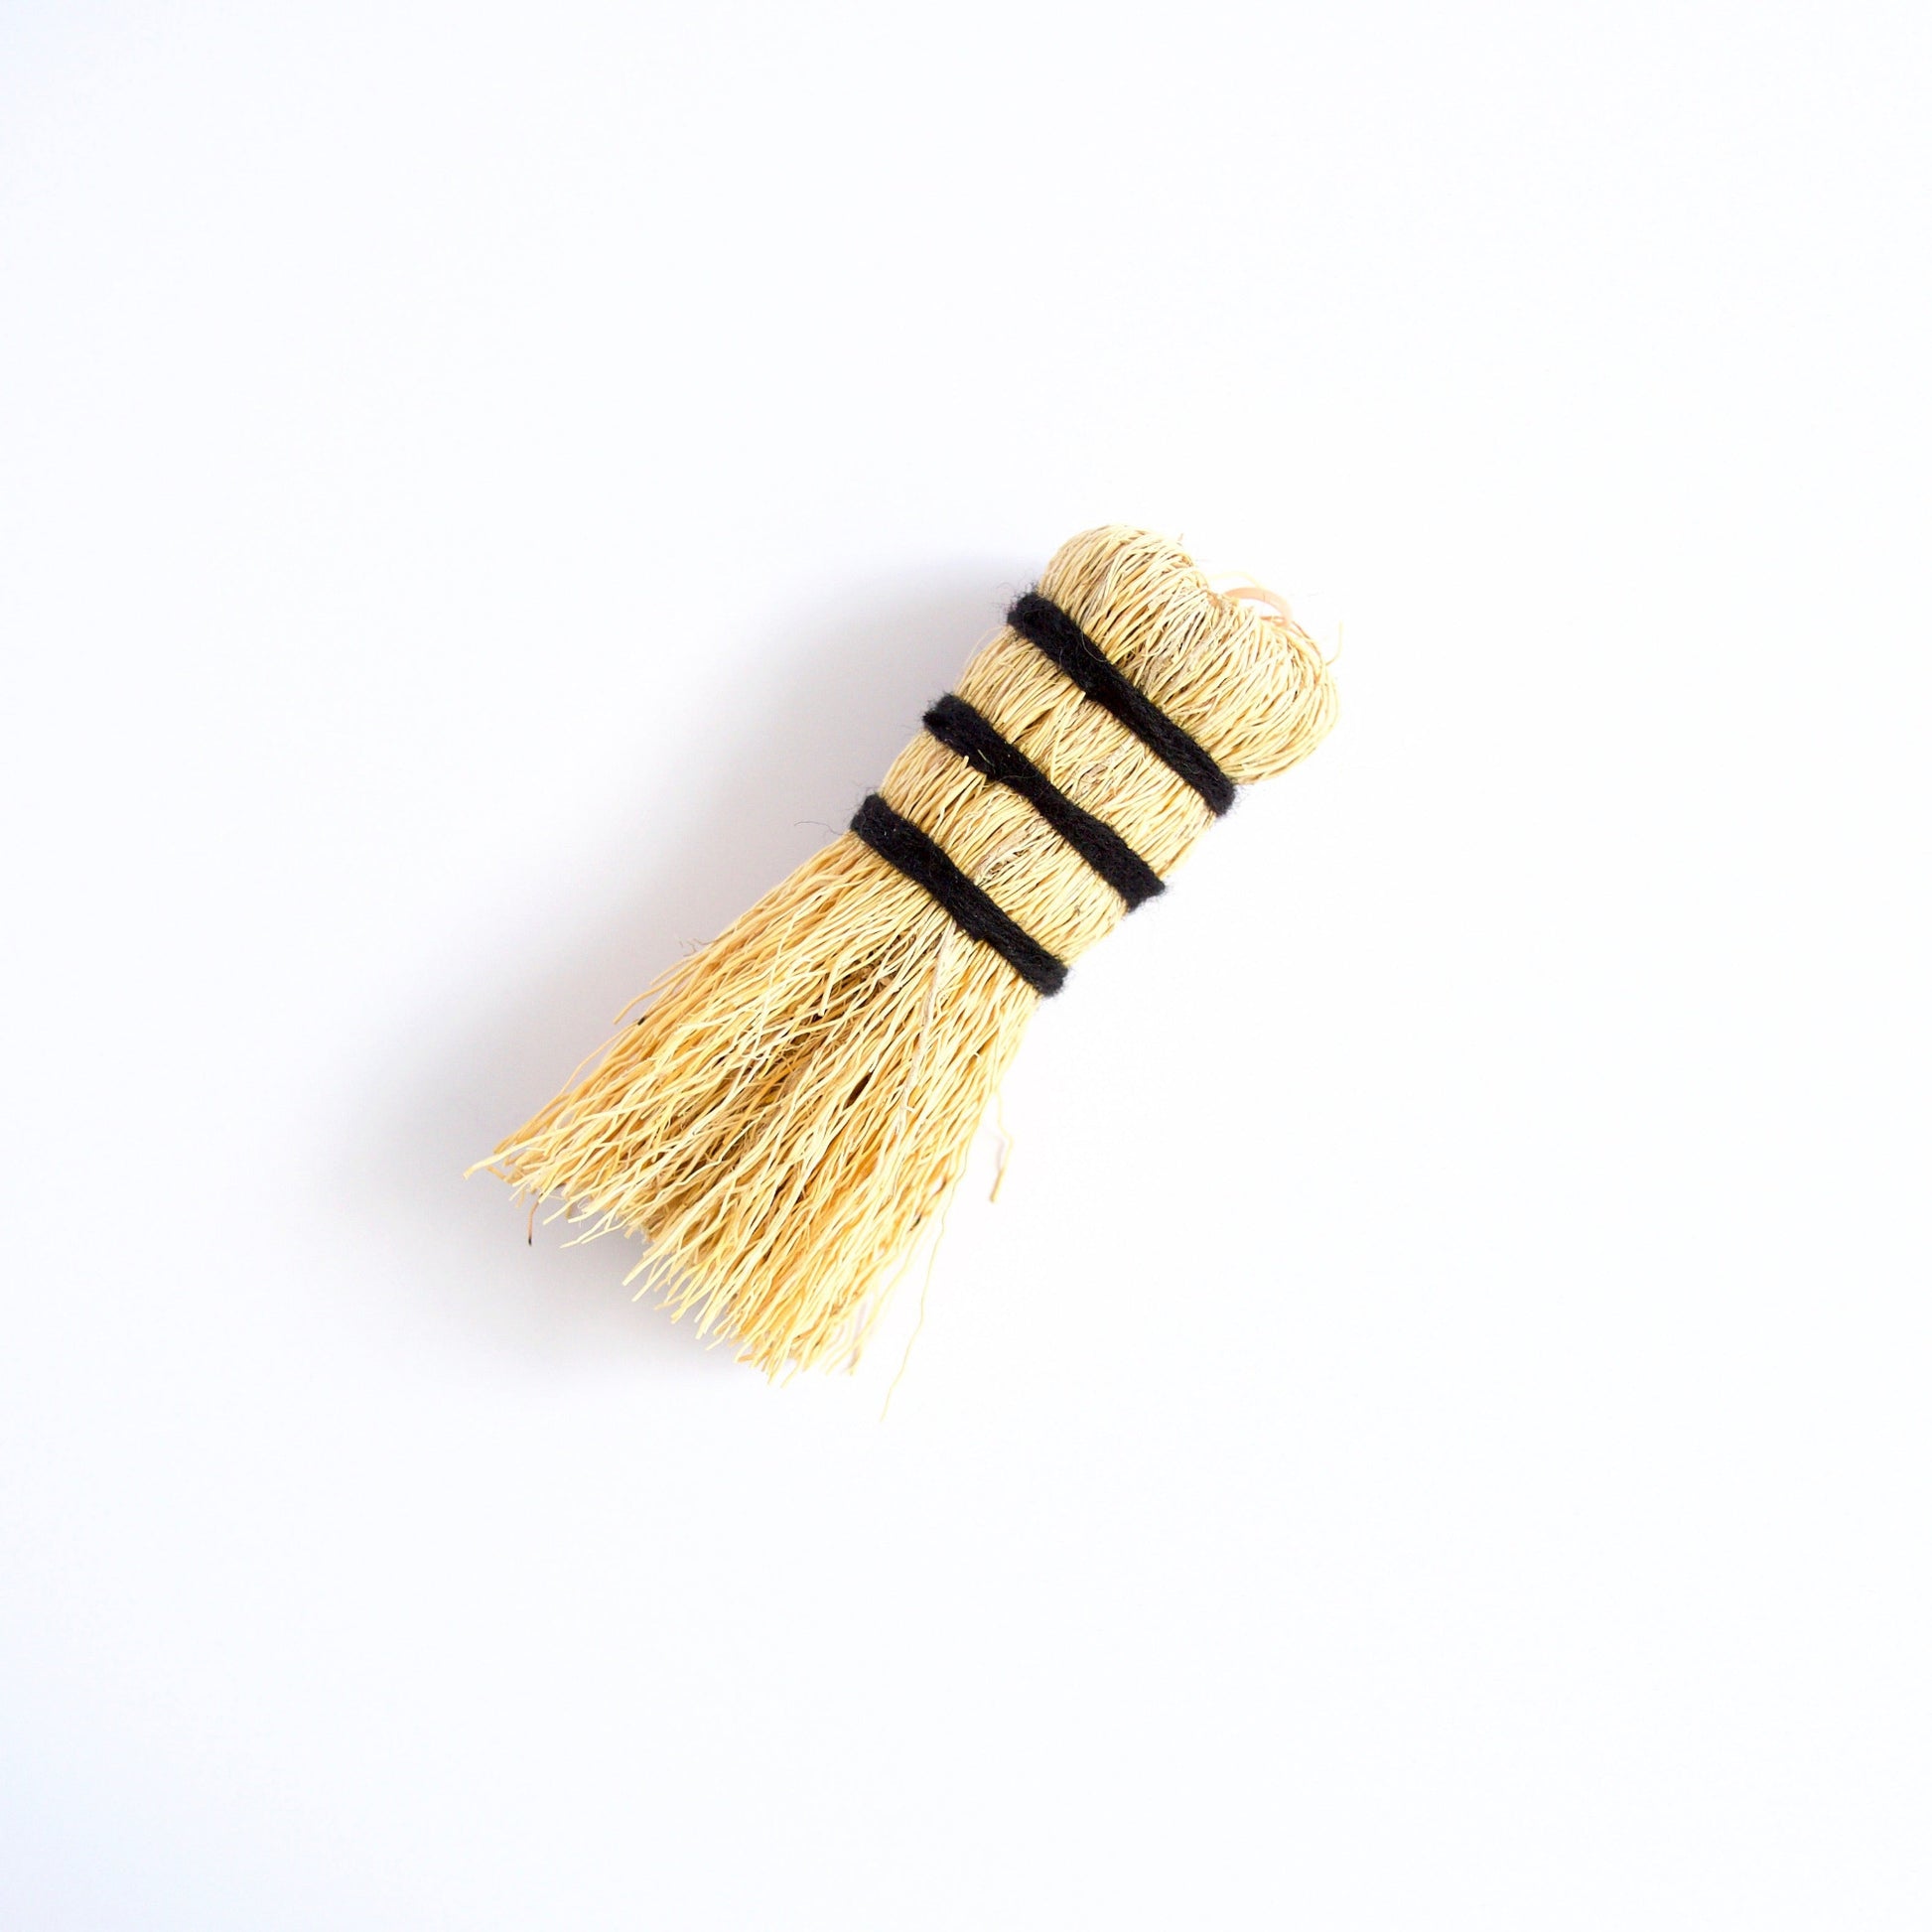 Escobeta de raiz Mexican dish scrubber made from plant roots wrapped in black wool yarn